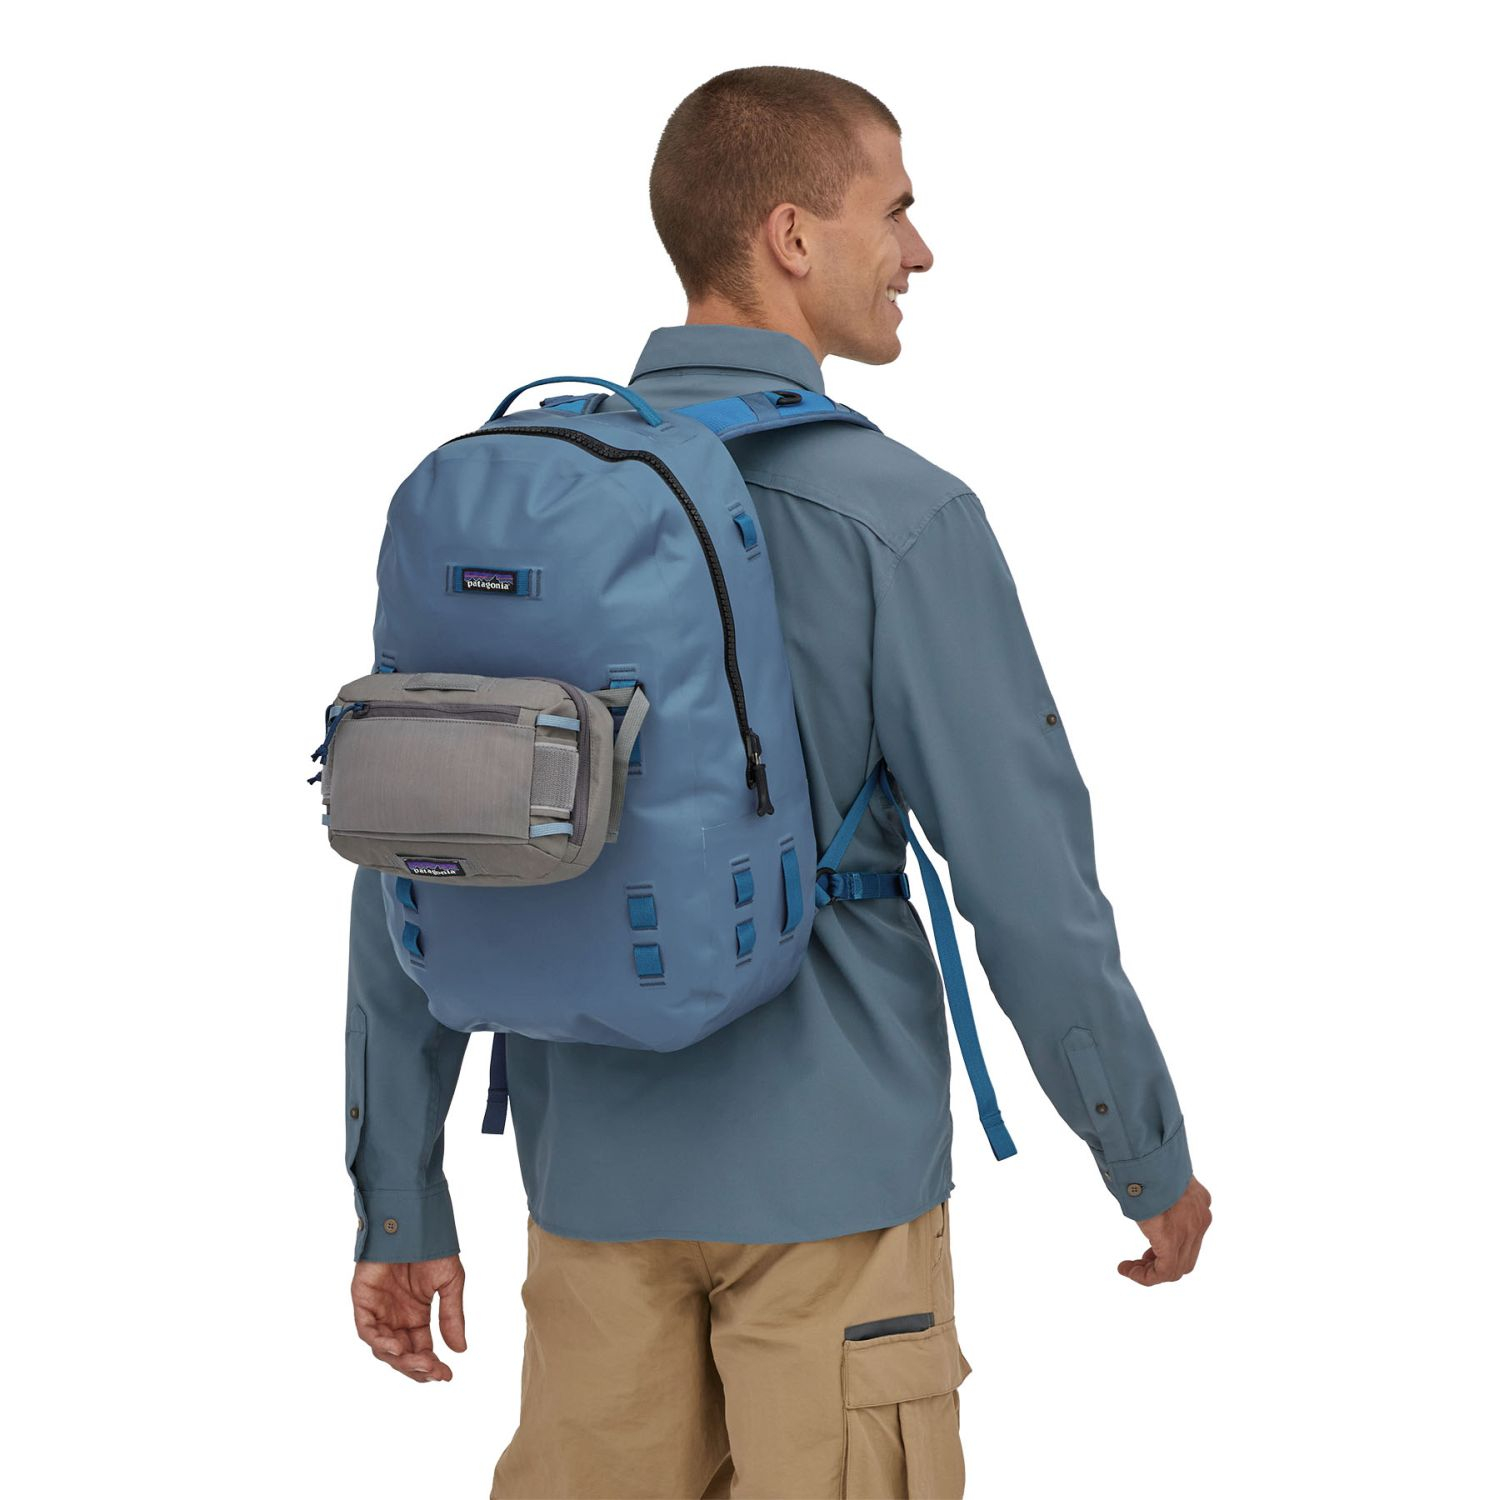 Guidewater Backpack (pigeon blue)